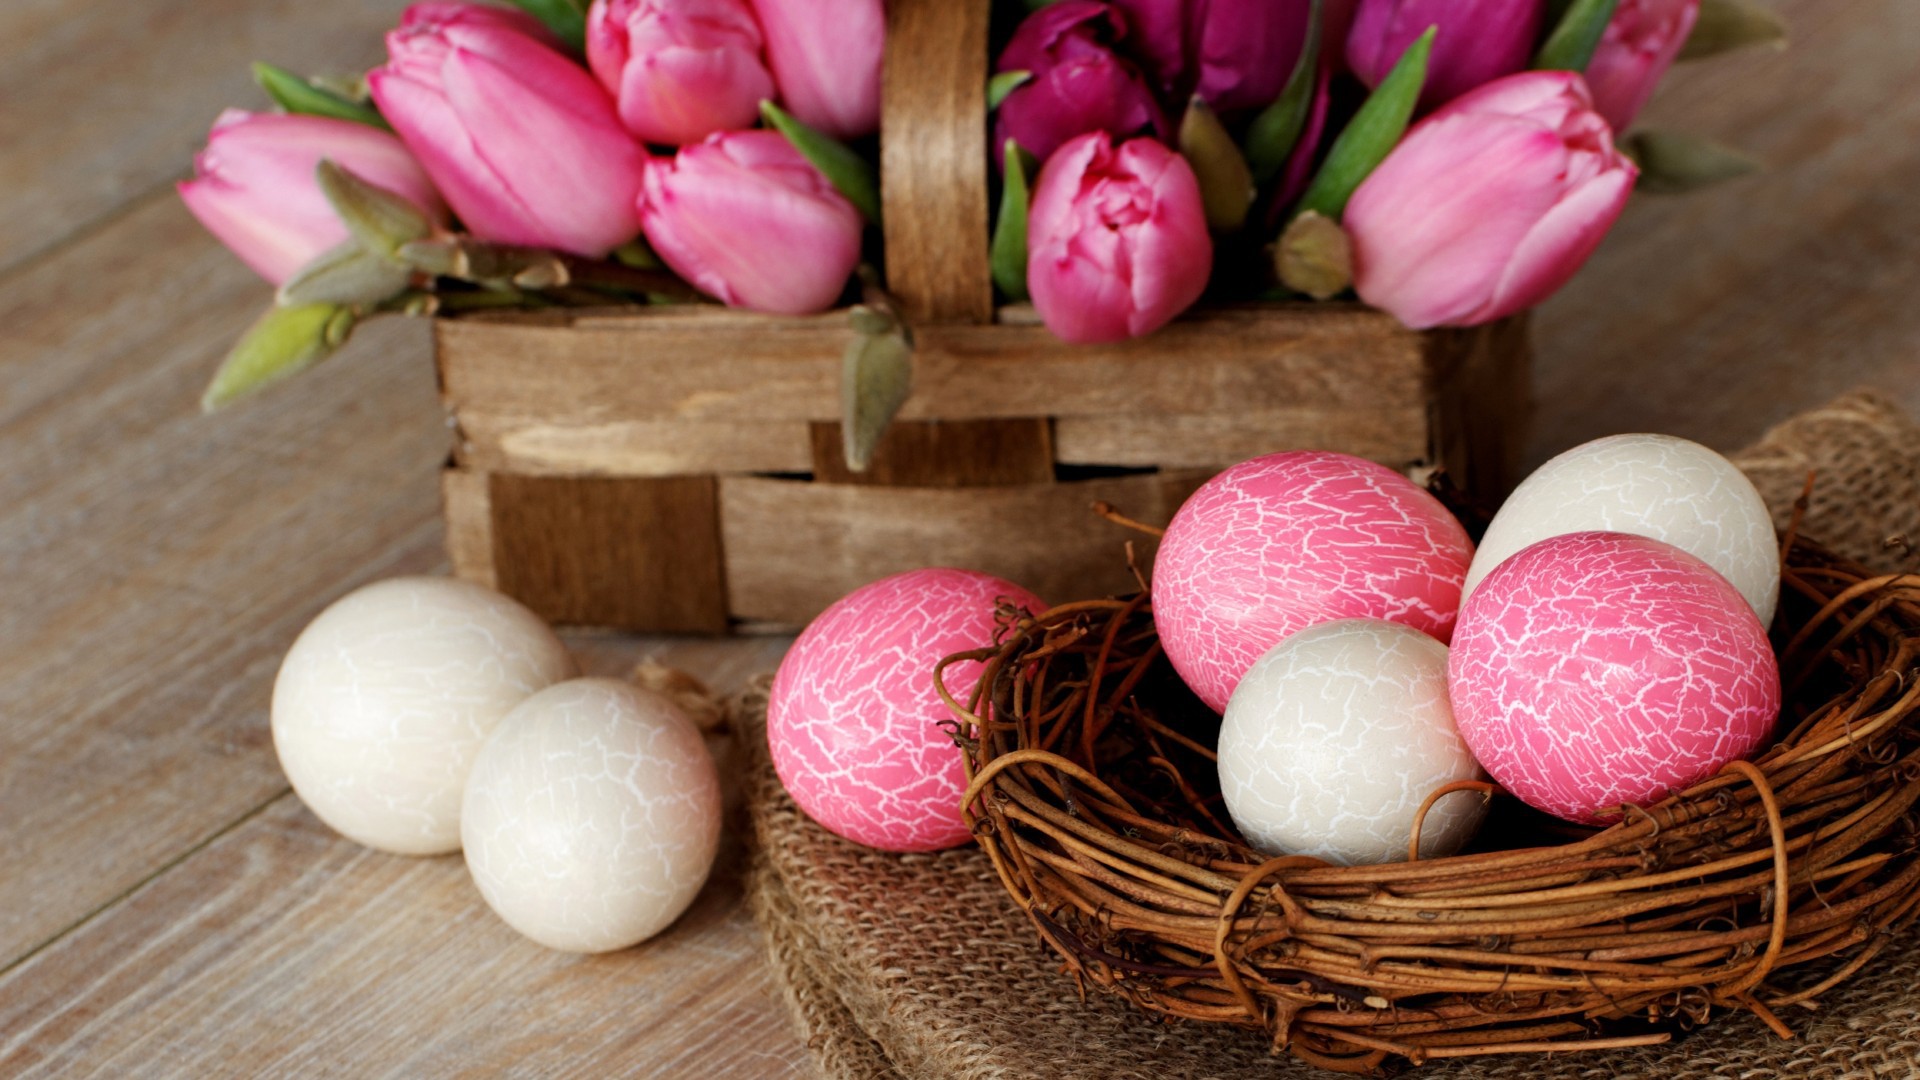 Eggs For Easter Wallpaper And Image Pictures Photos